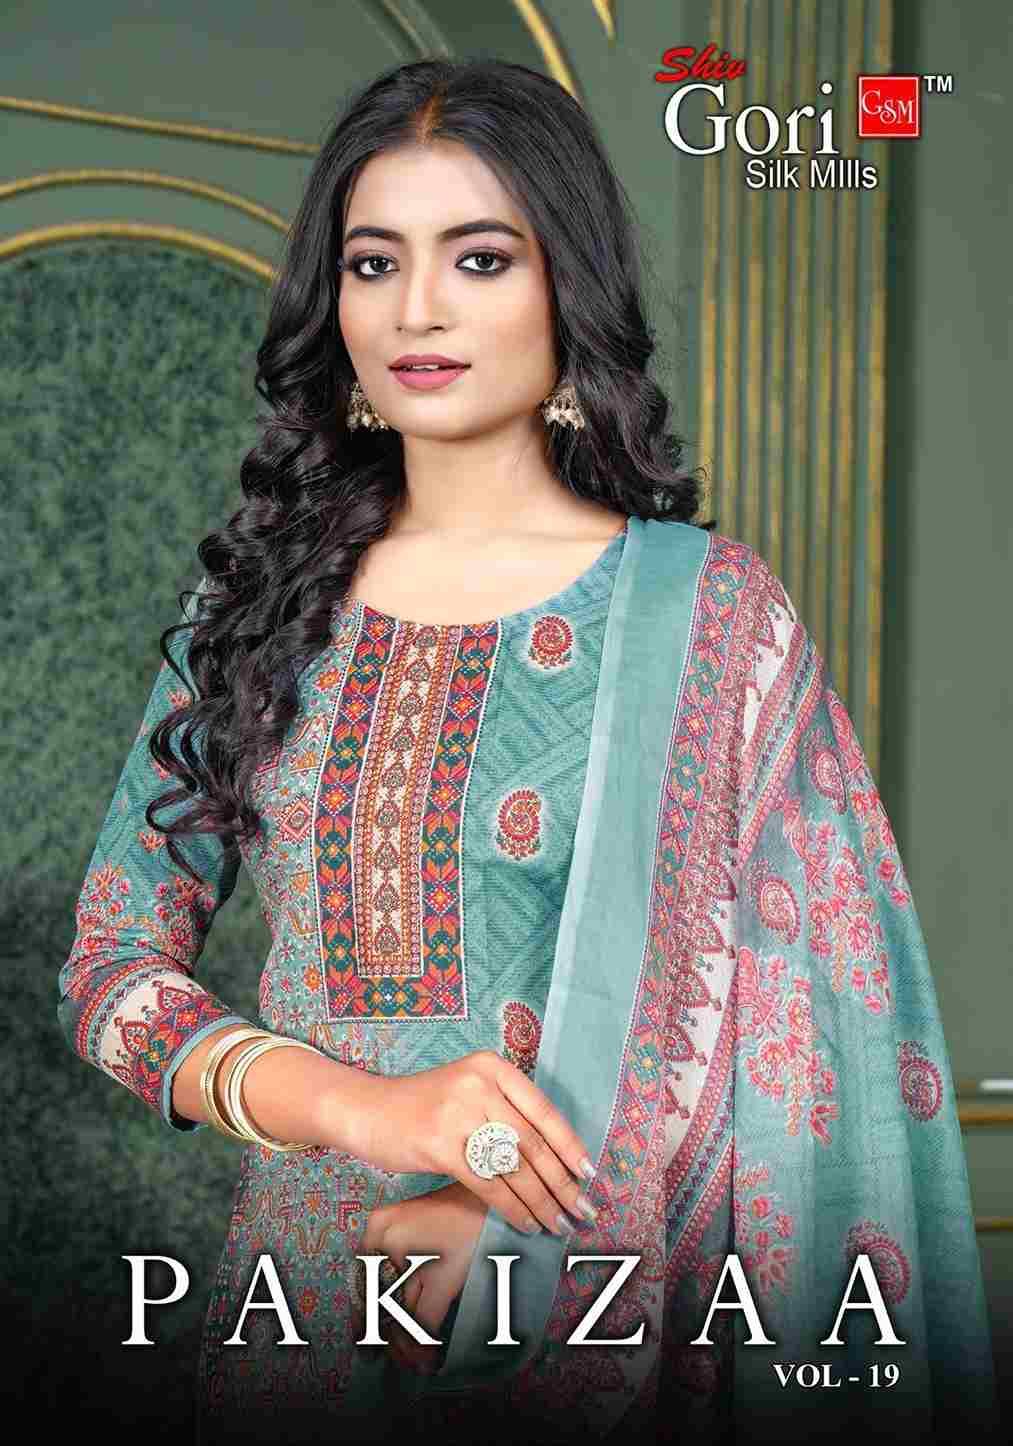 Pakizaa Vol-19 By Shiv Gori Silk Mills 19001 To 19012 Series Beautiful Festive Suits Colorful Stylish Fancy Casual Wear & Ethnic Wear Pure Cotton Dresses At Wholesale Price